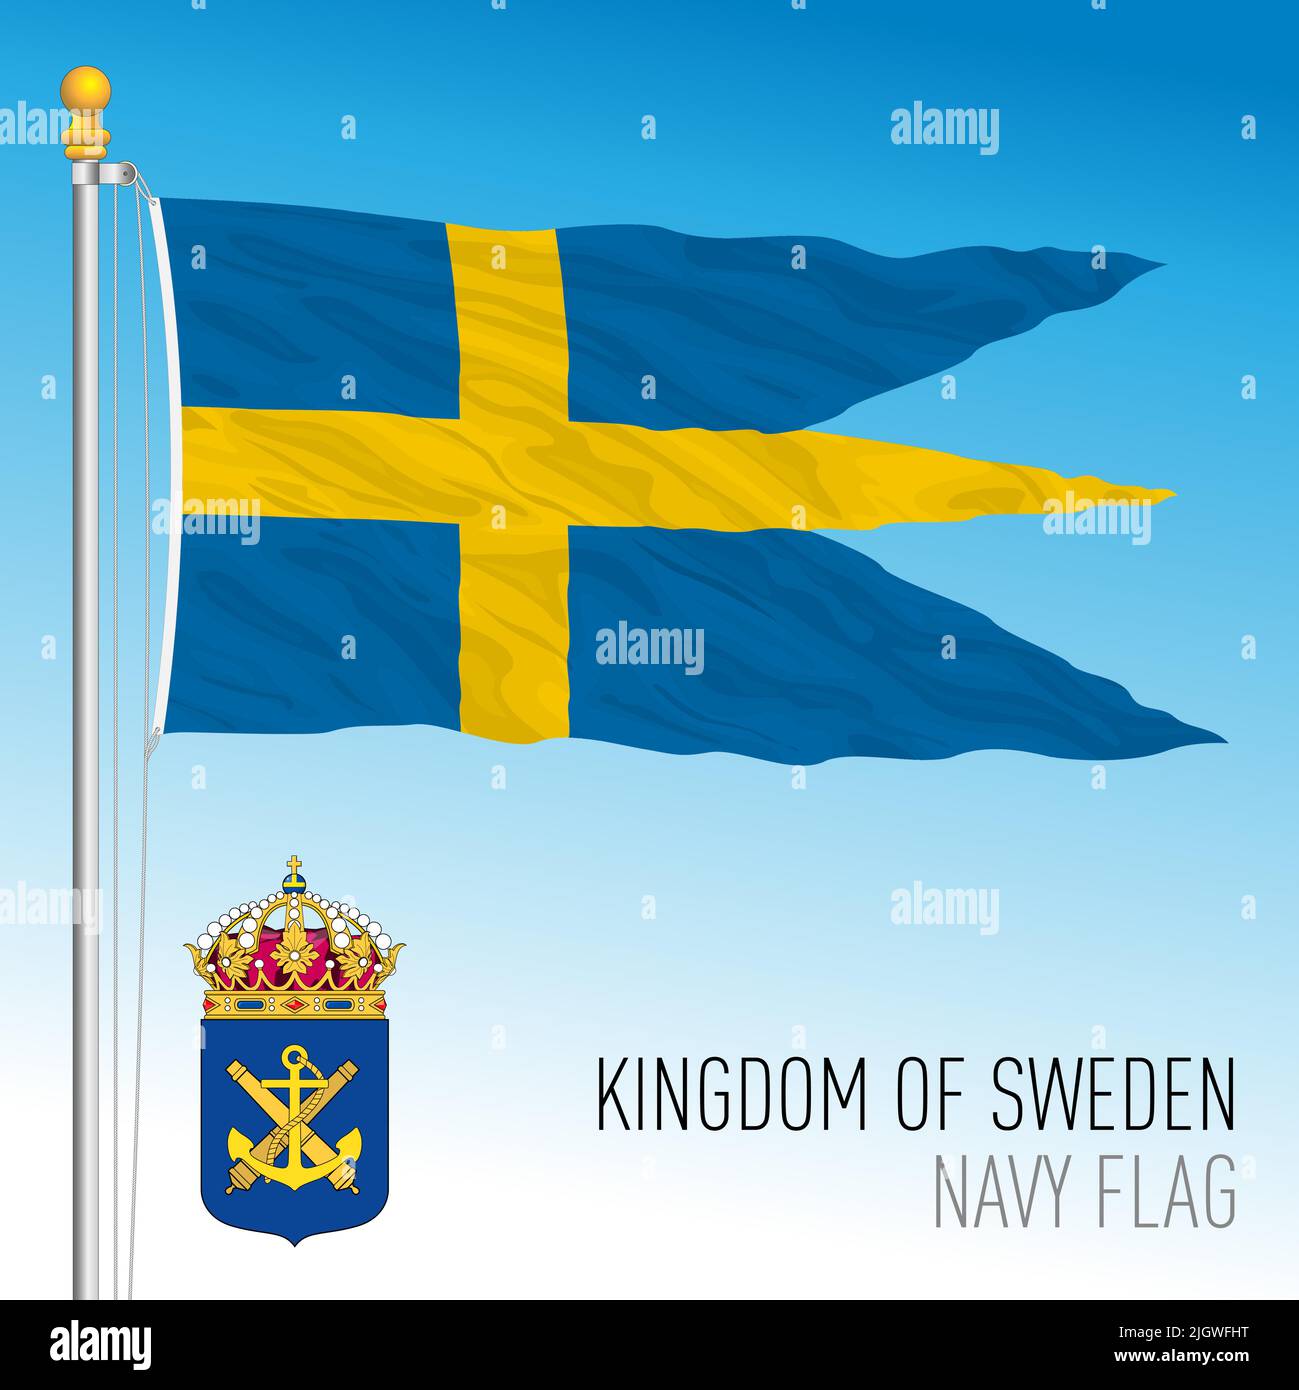 Swedish Navy flag and coat of arms, Kingdom of Sweden, European Union, vector illustration Stock Vector